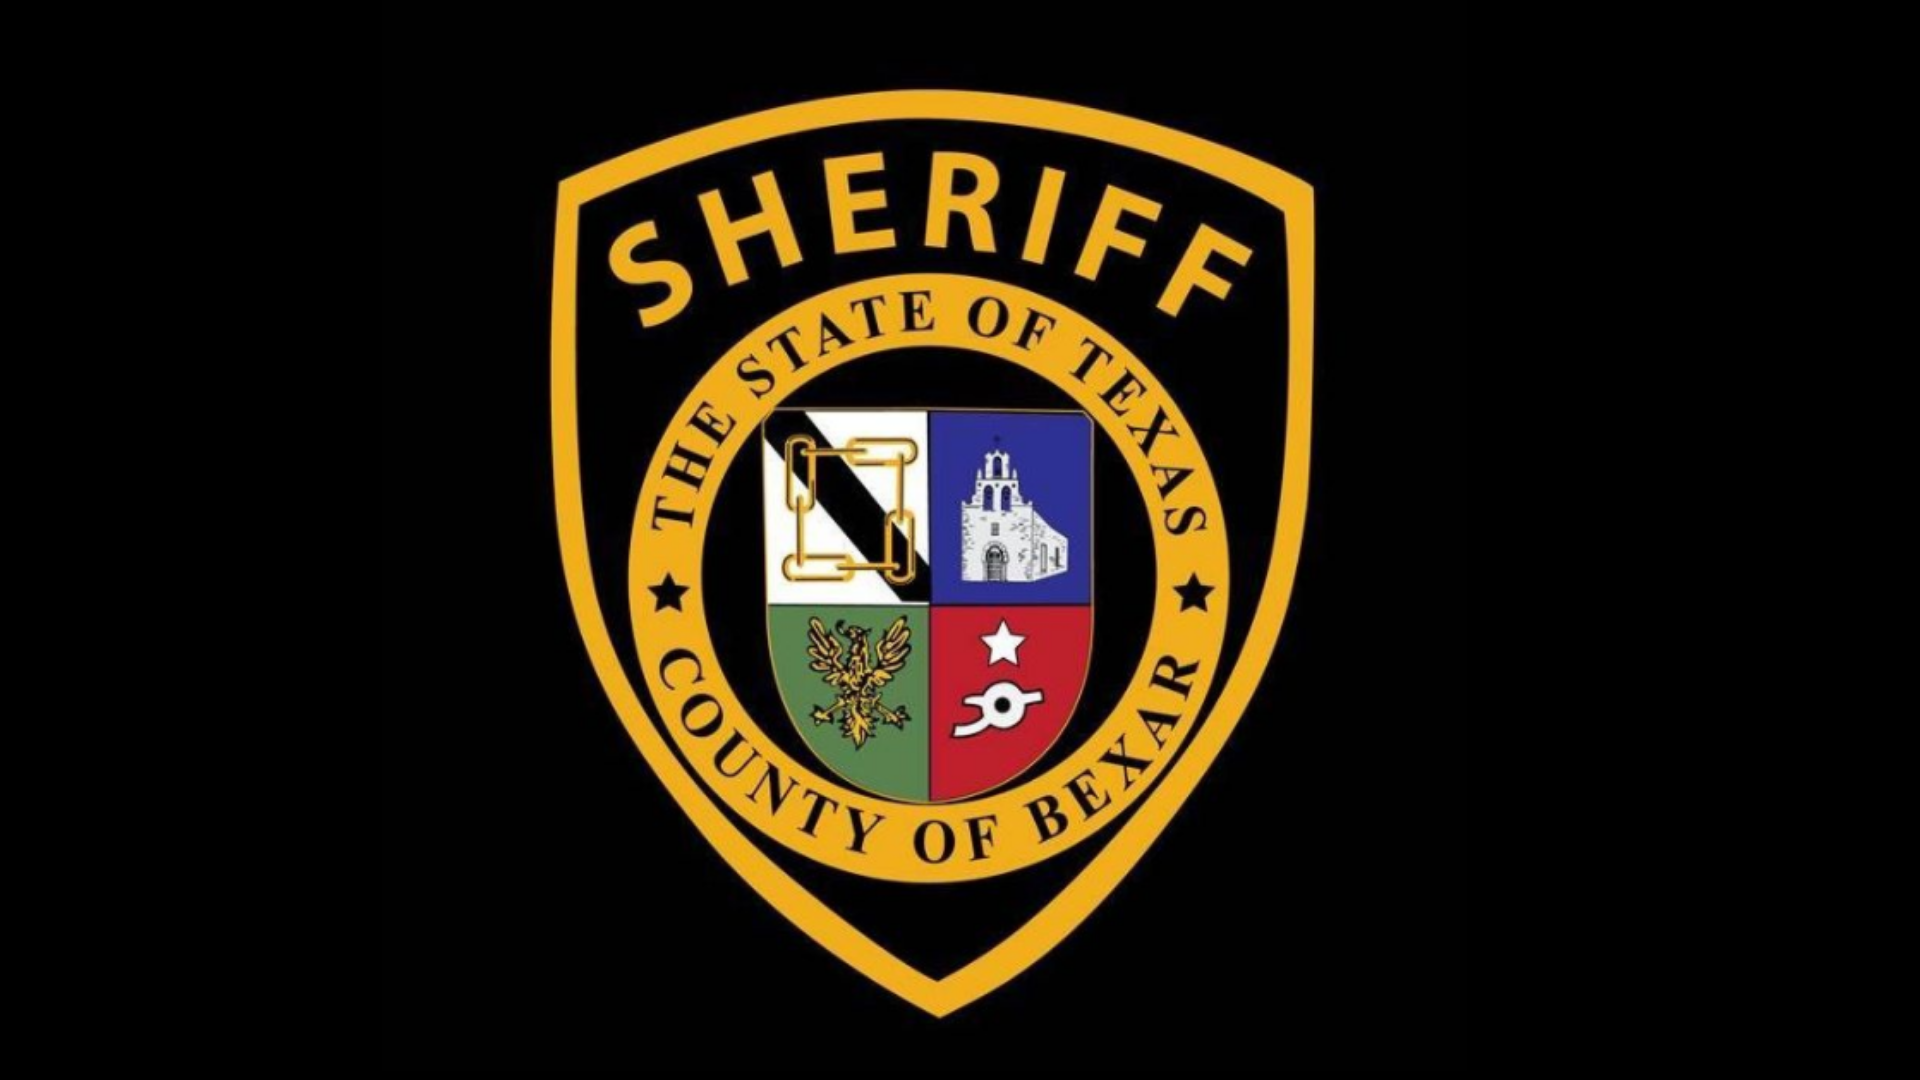 The deputy involved in the May, 2020 incident has been placed on administrative leave.